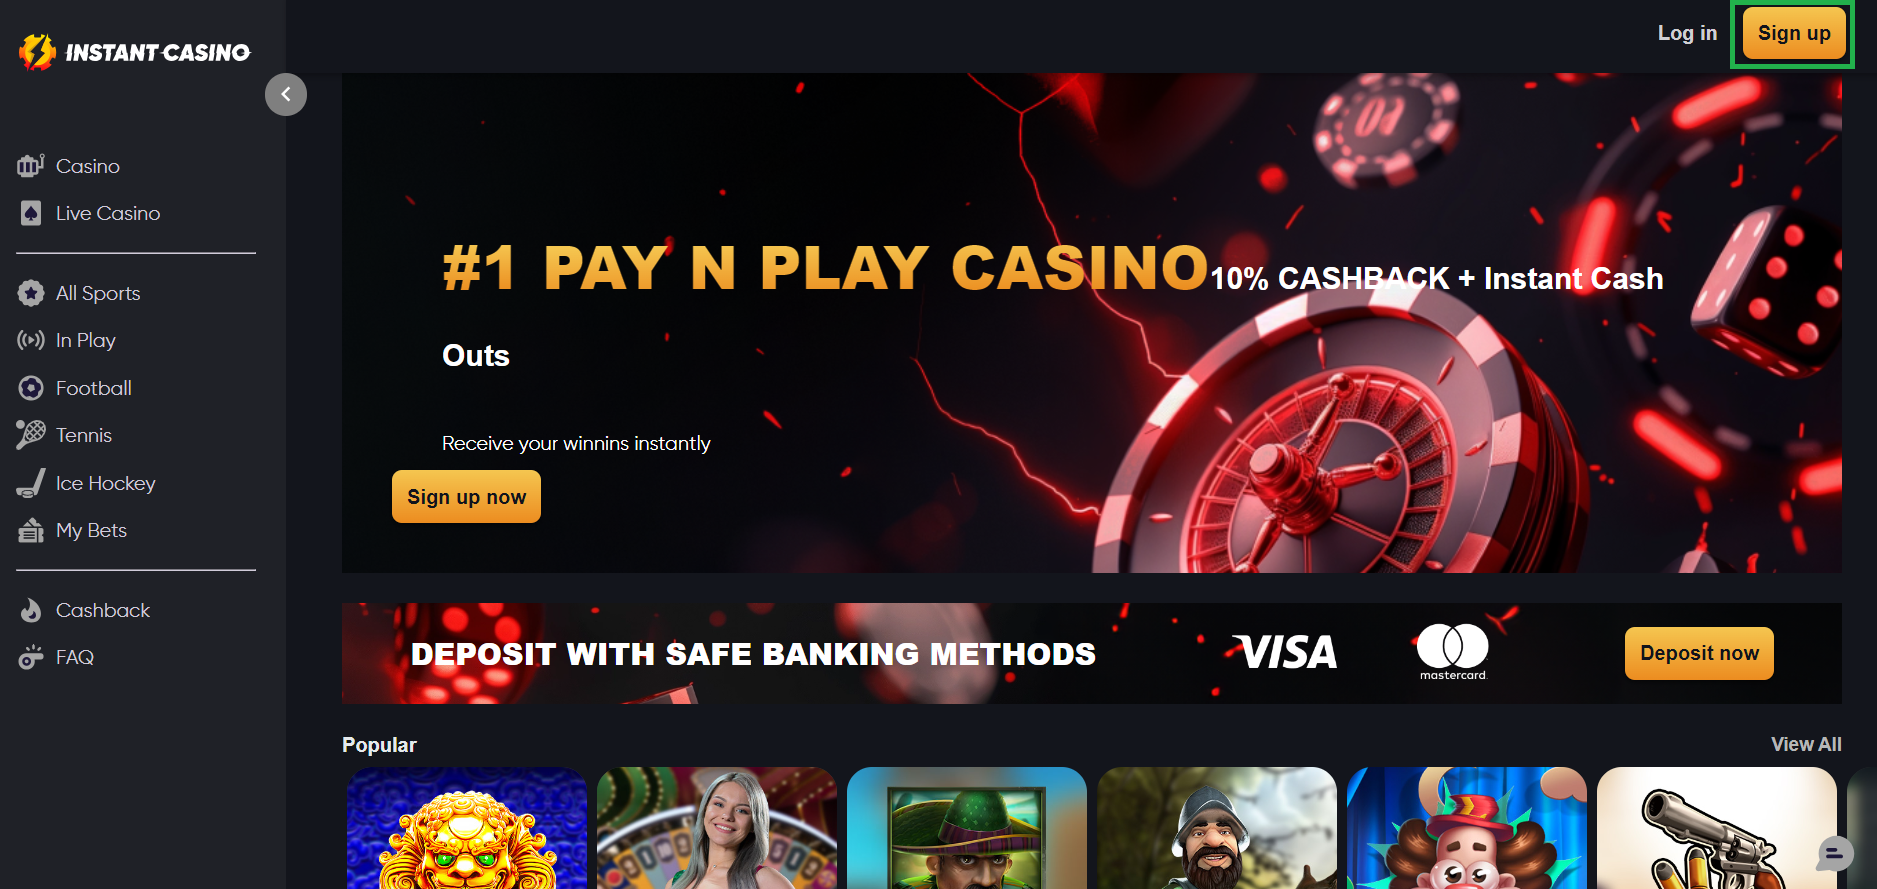 Step 1 - Visit the Casino Site and Register